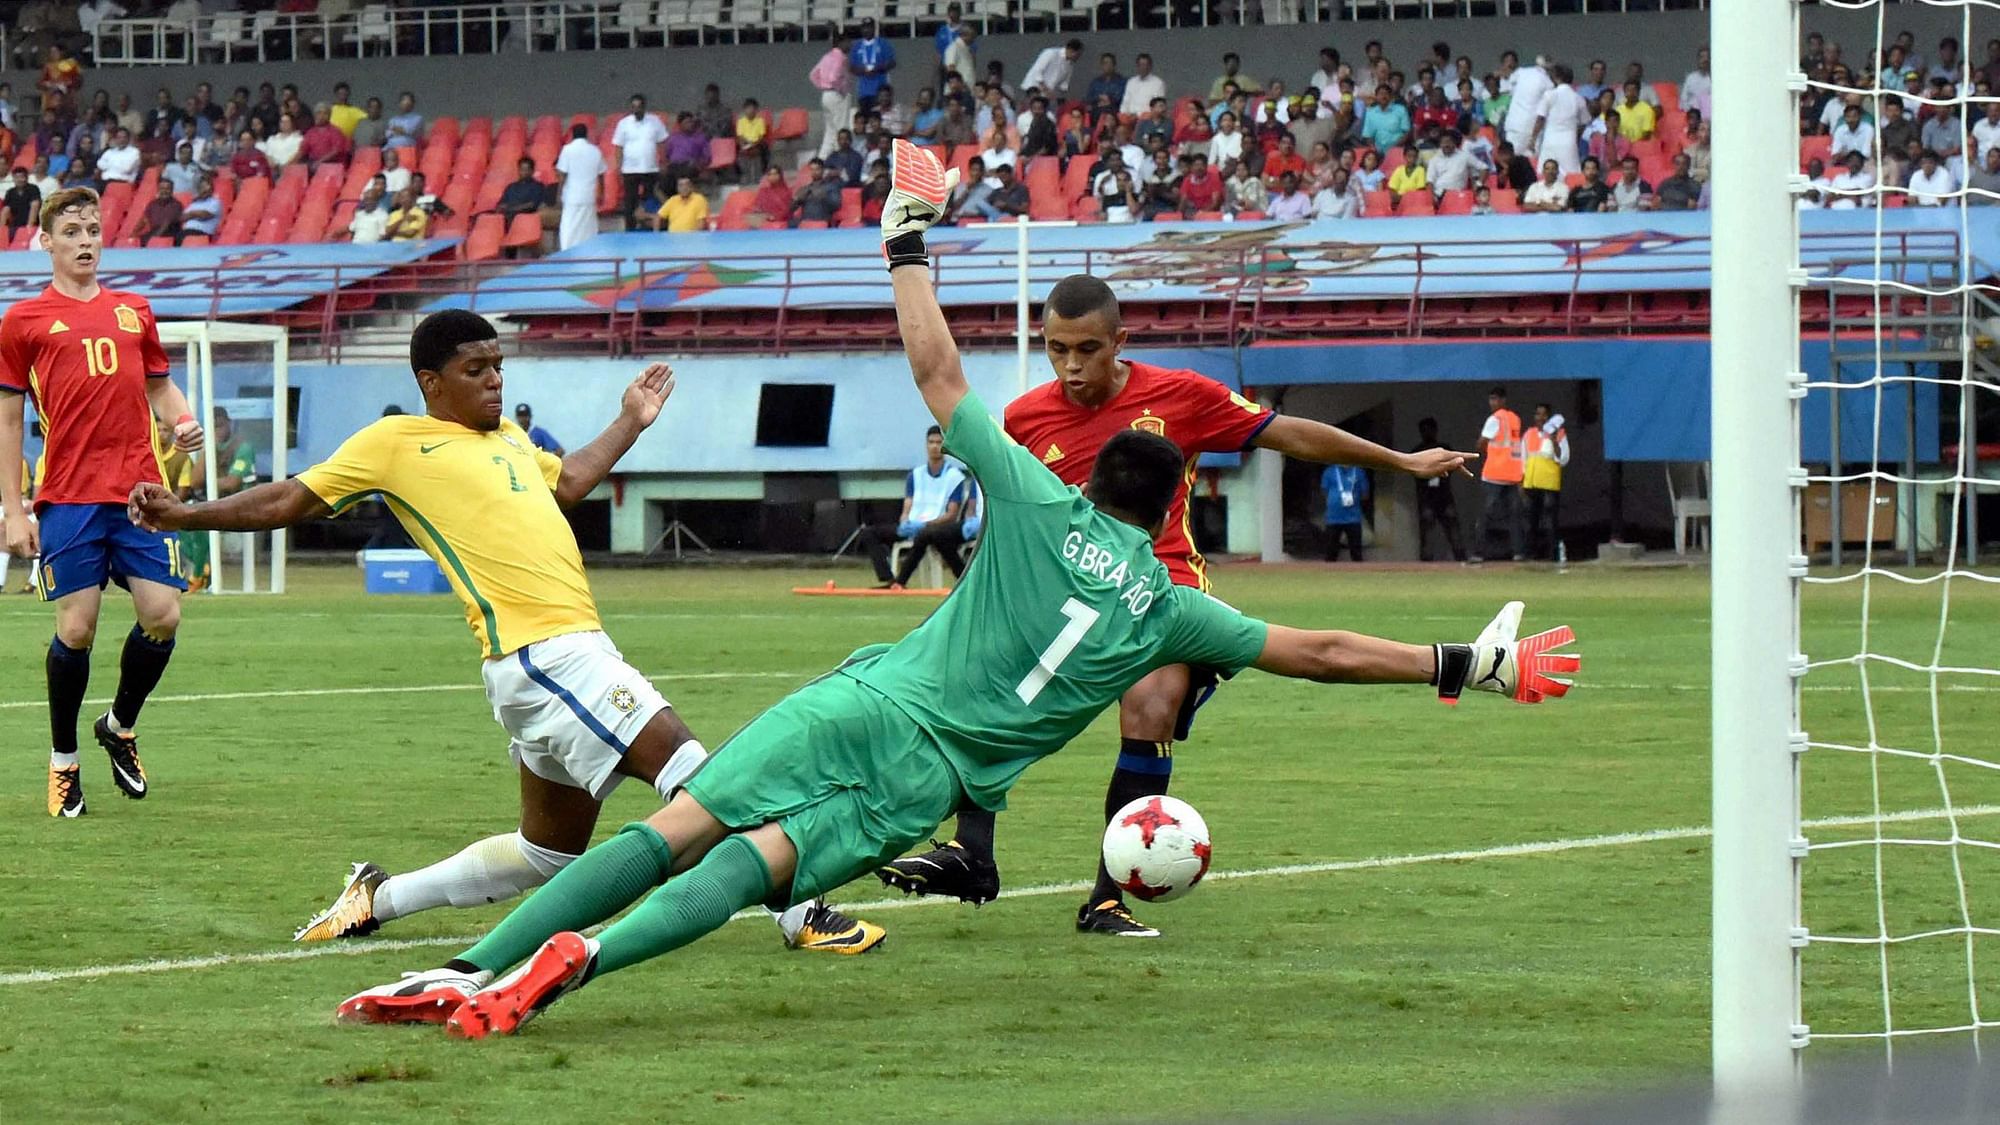 Kochi: Spain’s Mohamed Moukhliss, in red, scores a goal against Brazil during their U-17 FIFA World Cup match in Jawaharlal Nehru International Stadium